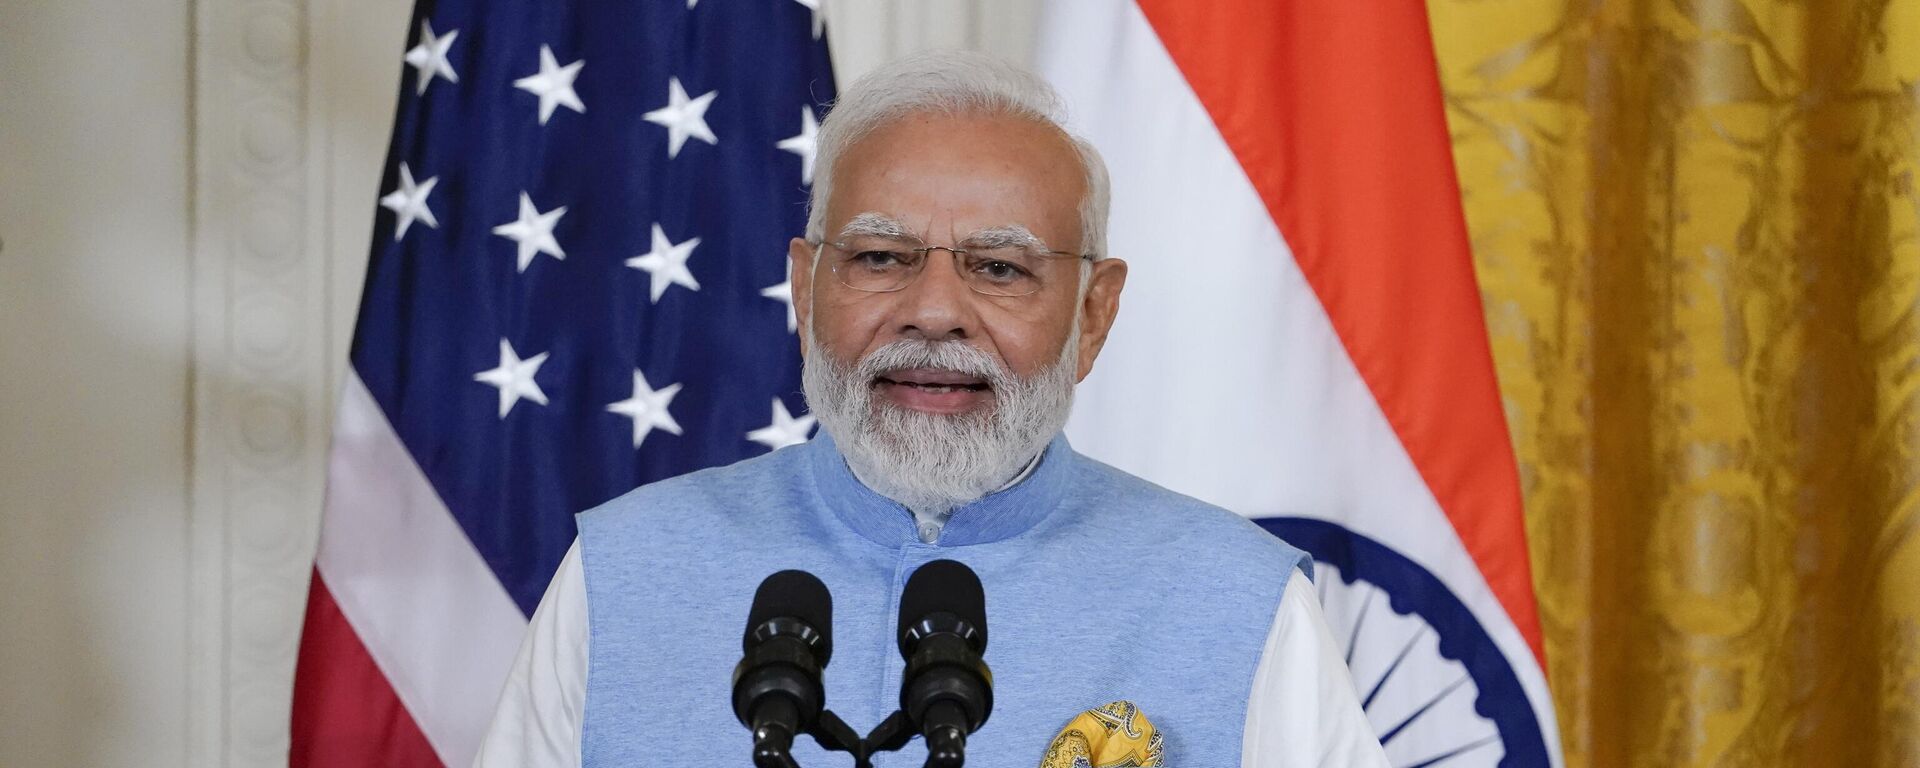 India's Prime Minister Narendra Modi speaks during a news conference with President Joe Biden in the East Room of the White House in Washington, Thursday, June 22, 2023. - Sputnik India, 1920, 23.06.2023